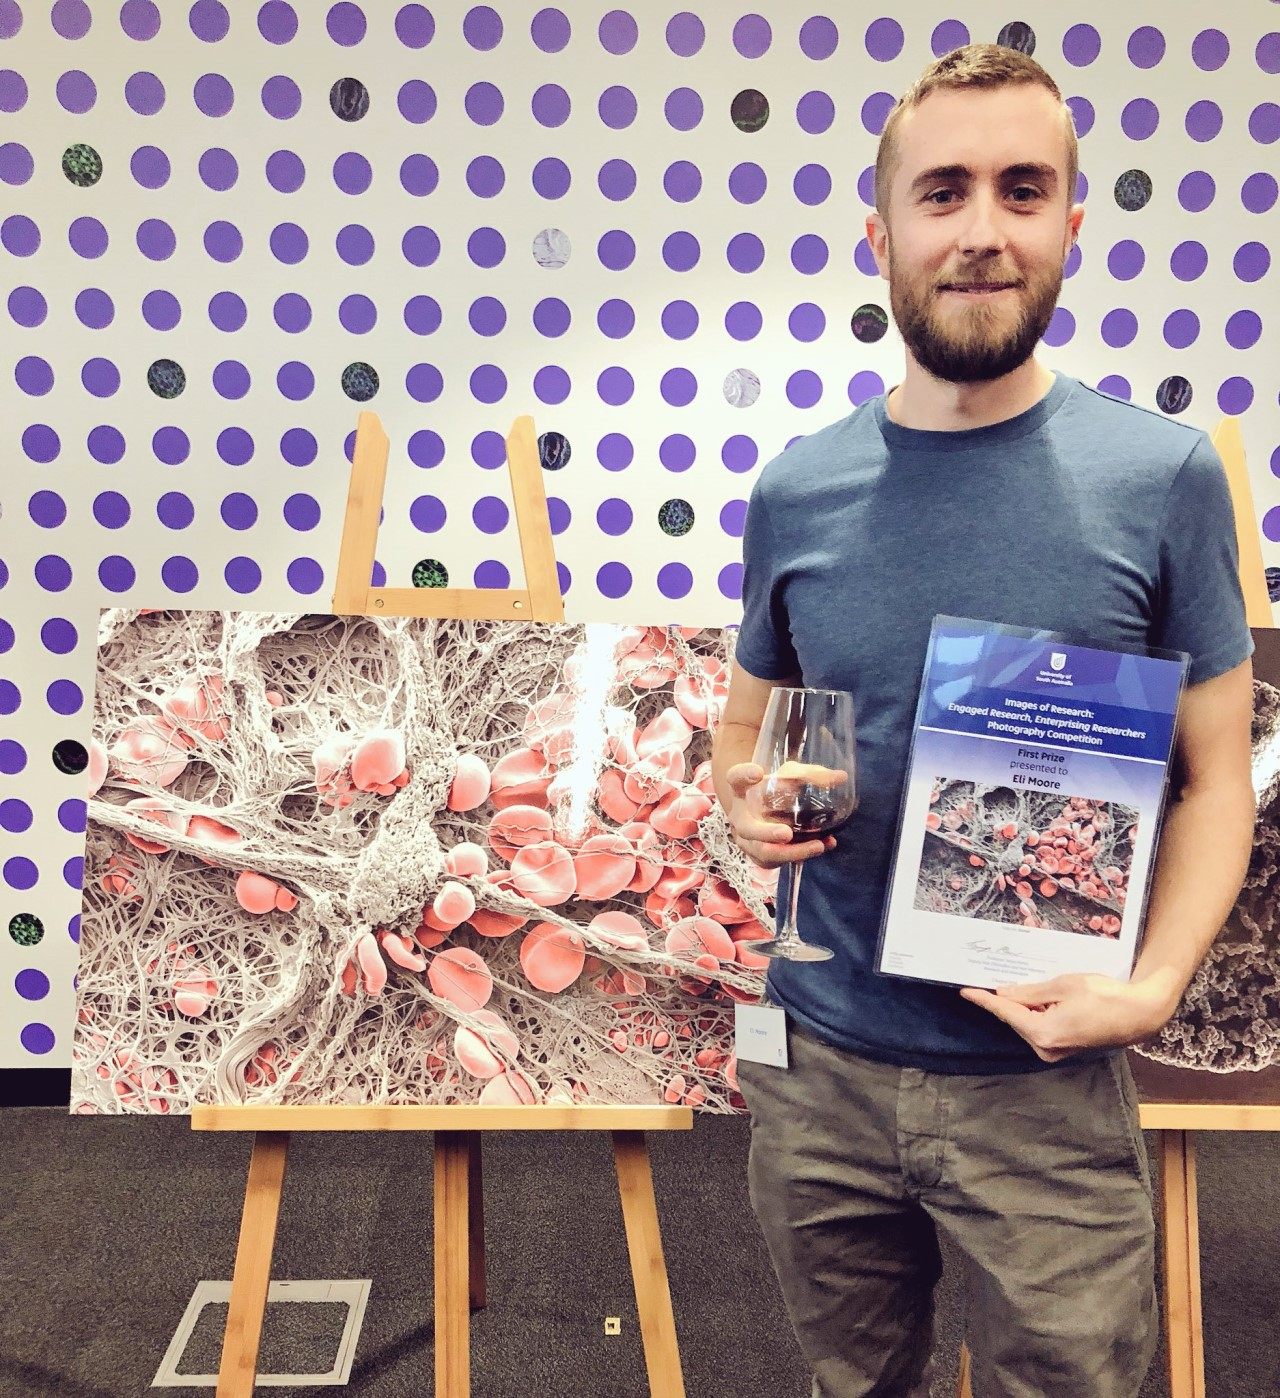 Dr Eli Moore and his image “Clotted” - first prize of the Images of Research Photography Competition 2018 of the University of South Australia.